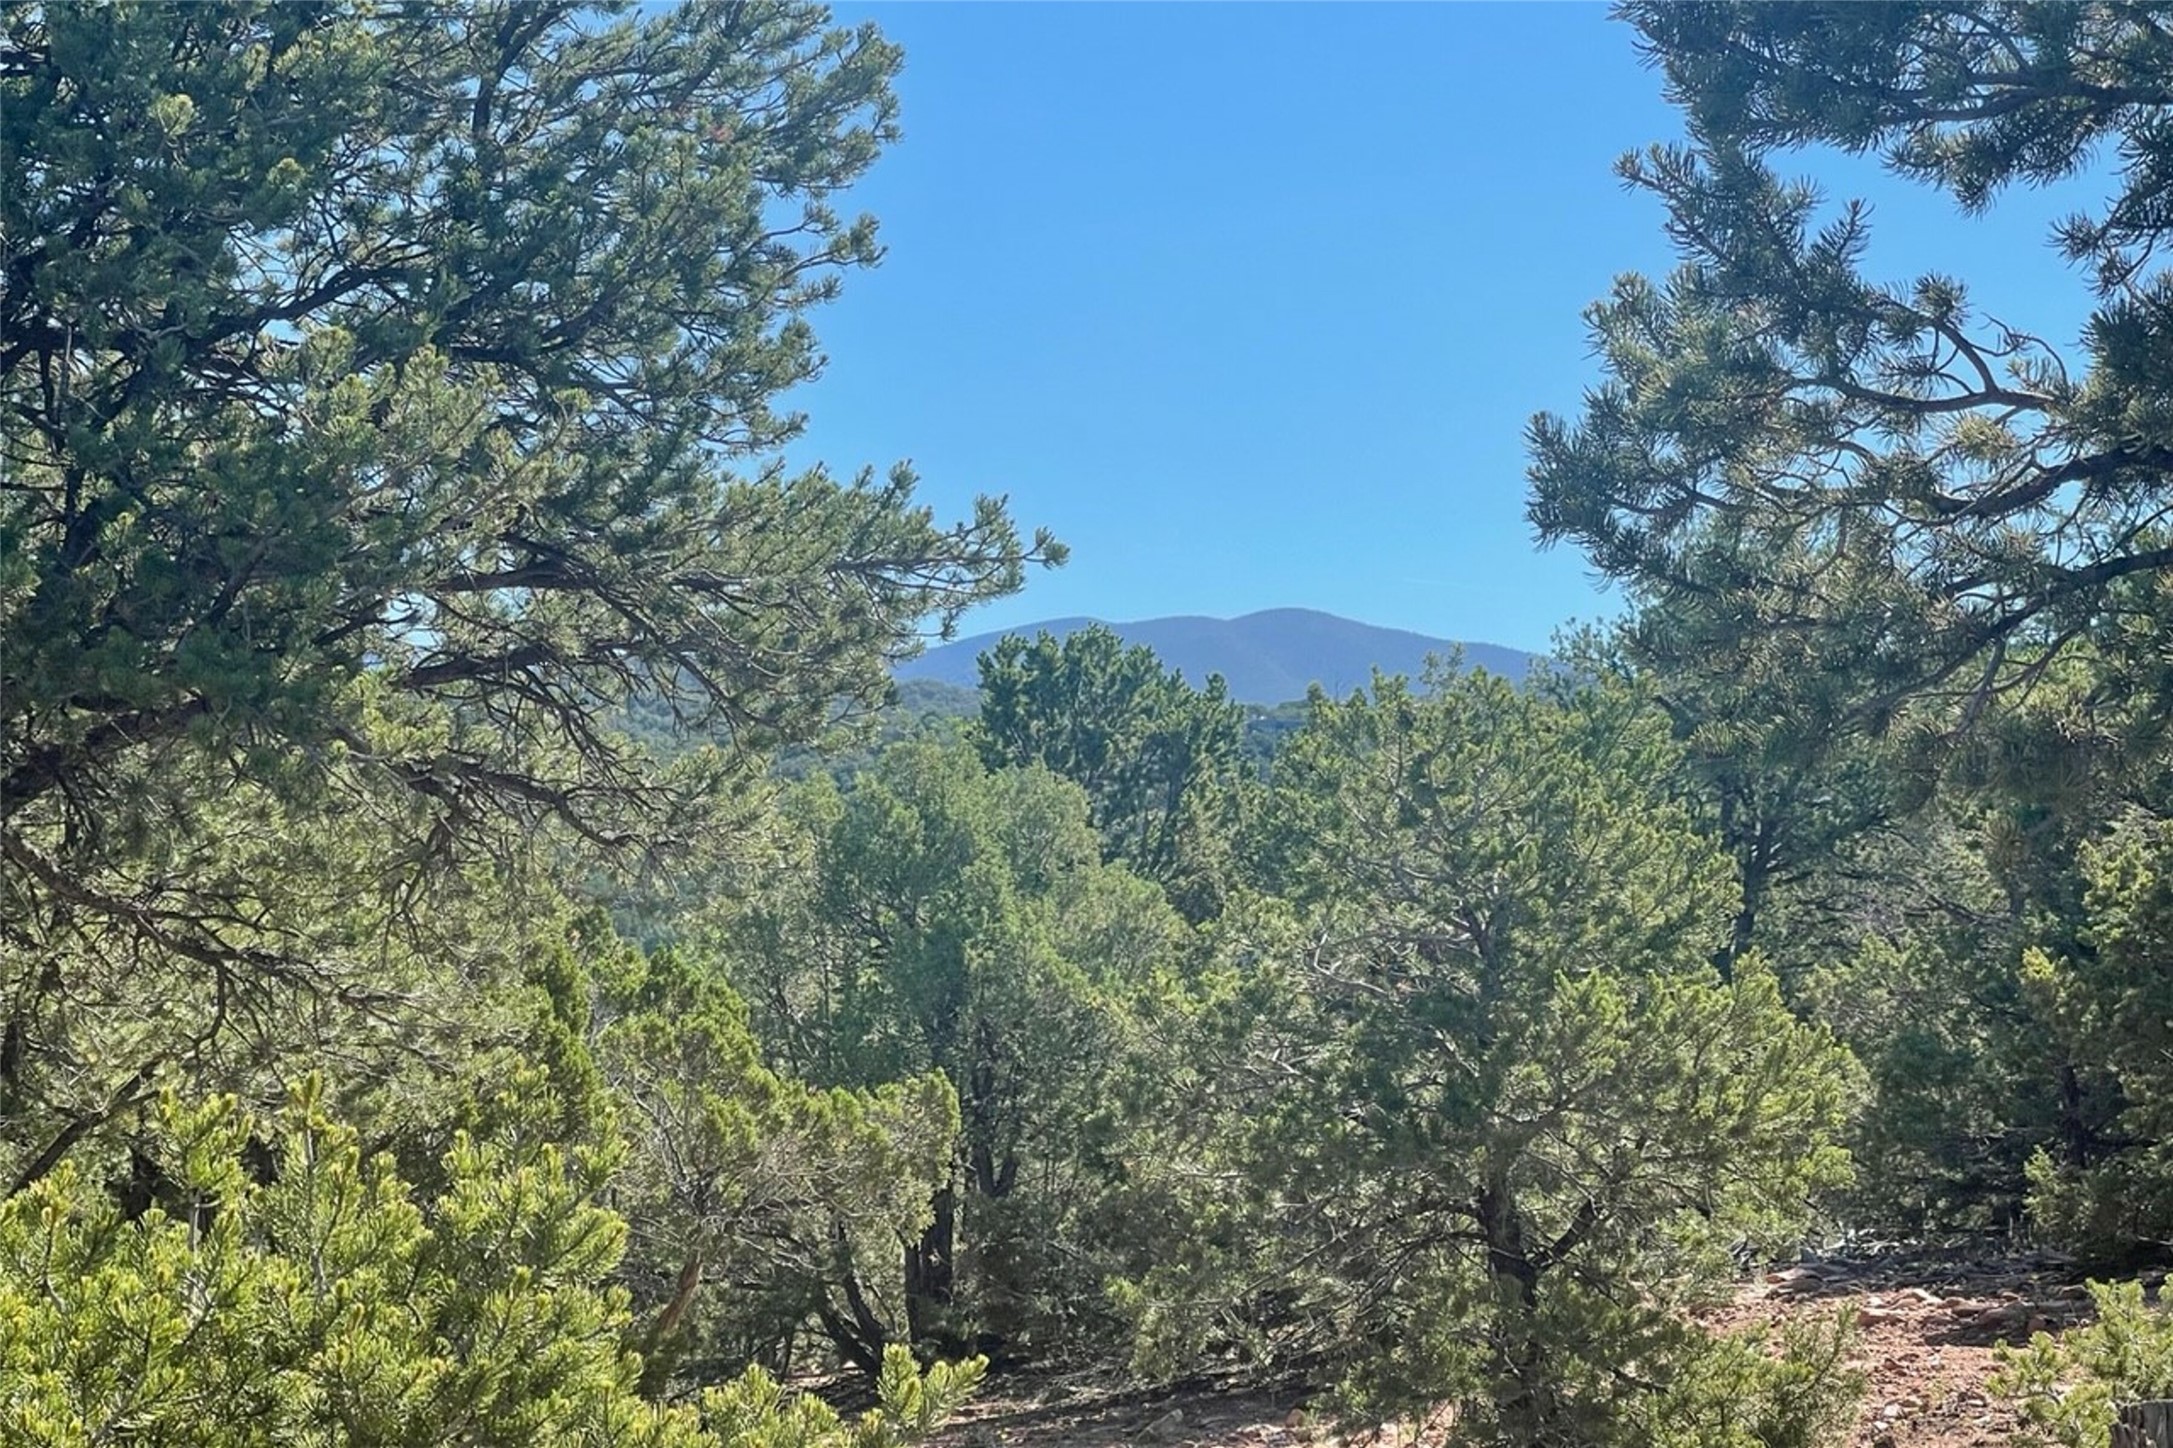 1805 Kachina Heights Lot 2, Santa Fe, New Mexico 87501, 3 Bedrooms Bedrooms, ,3 BathroomsBathrooms,Residential,For Sale,1805 Kachina Heights Lot 2,202234647